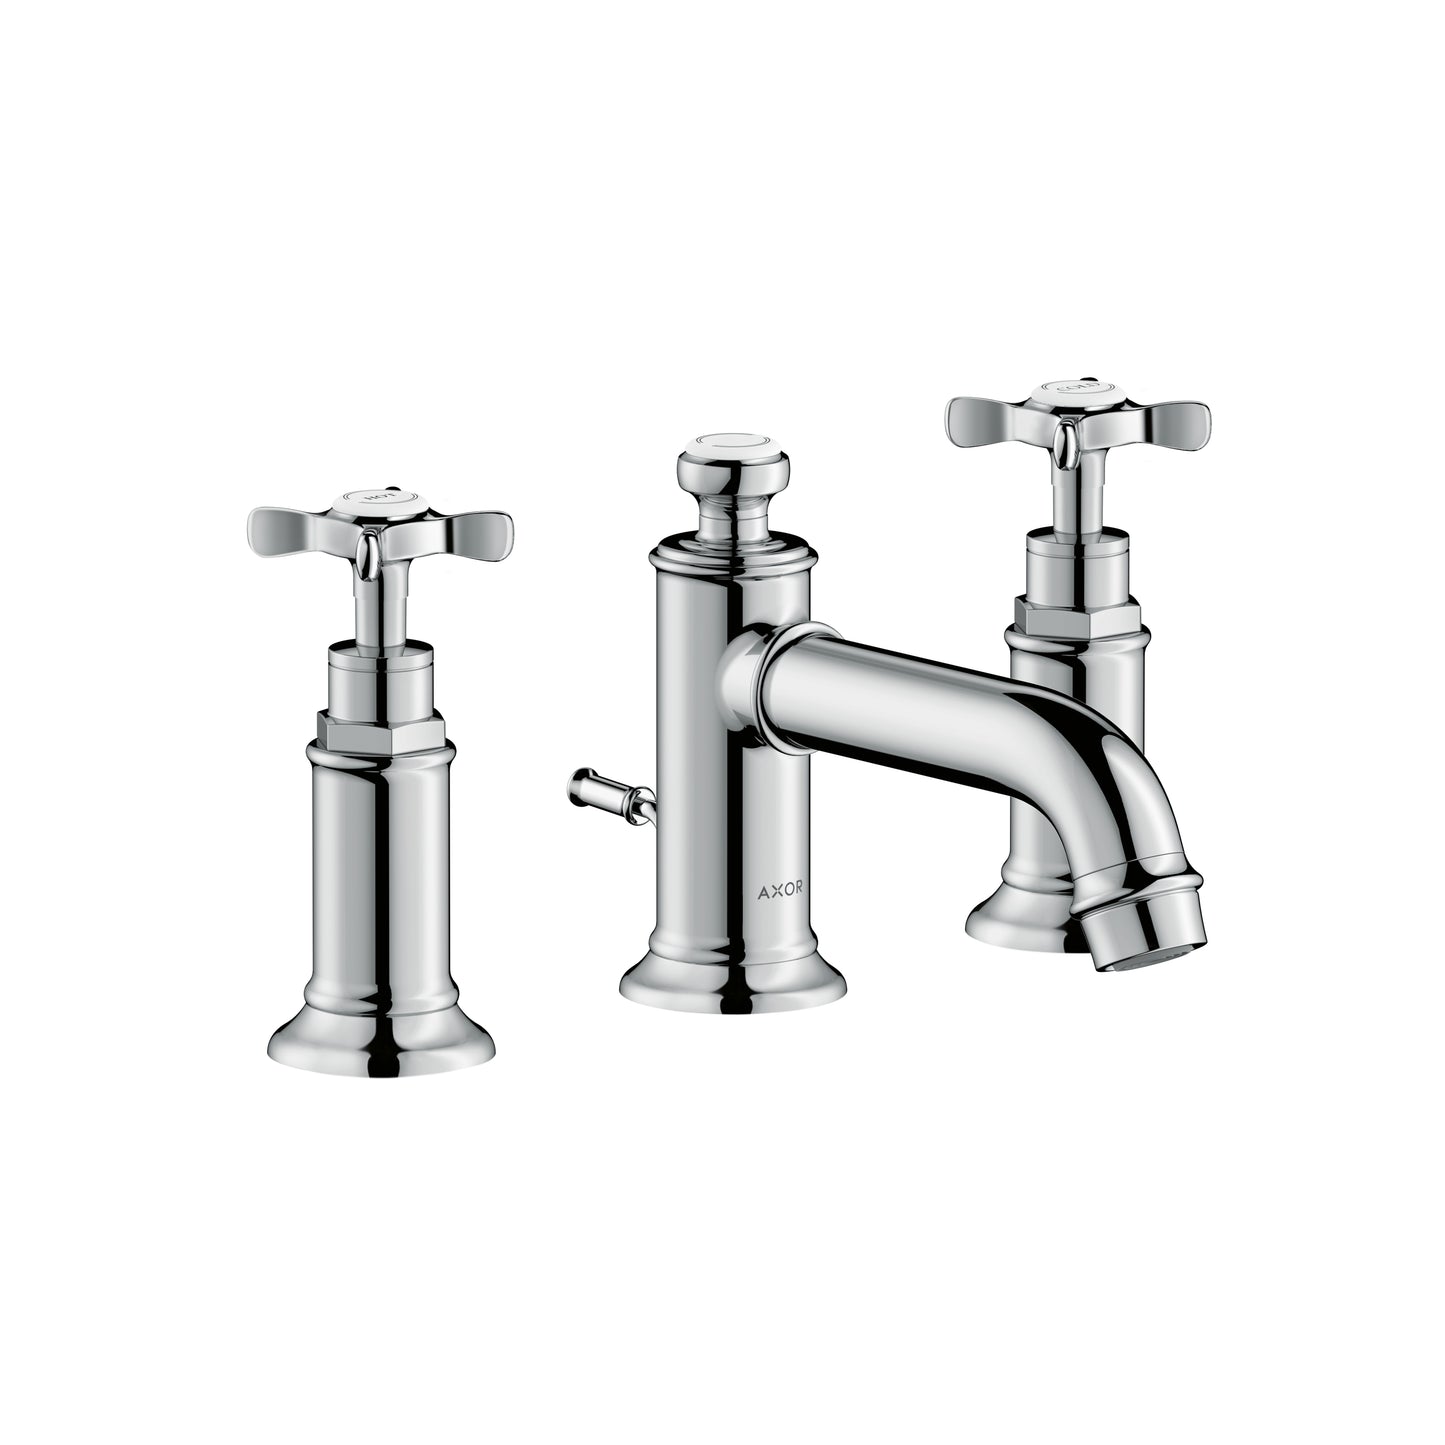 AXOR 16536001 Chrome Montreux Classic Widespread Bathroom Faucet 1.2 GPM